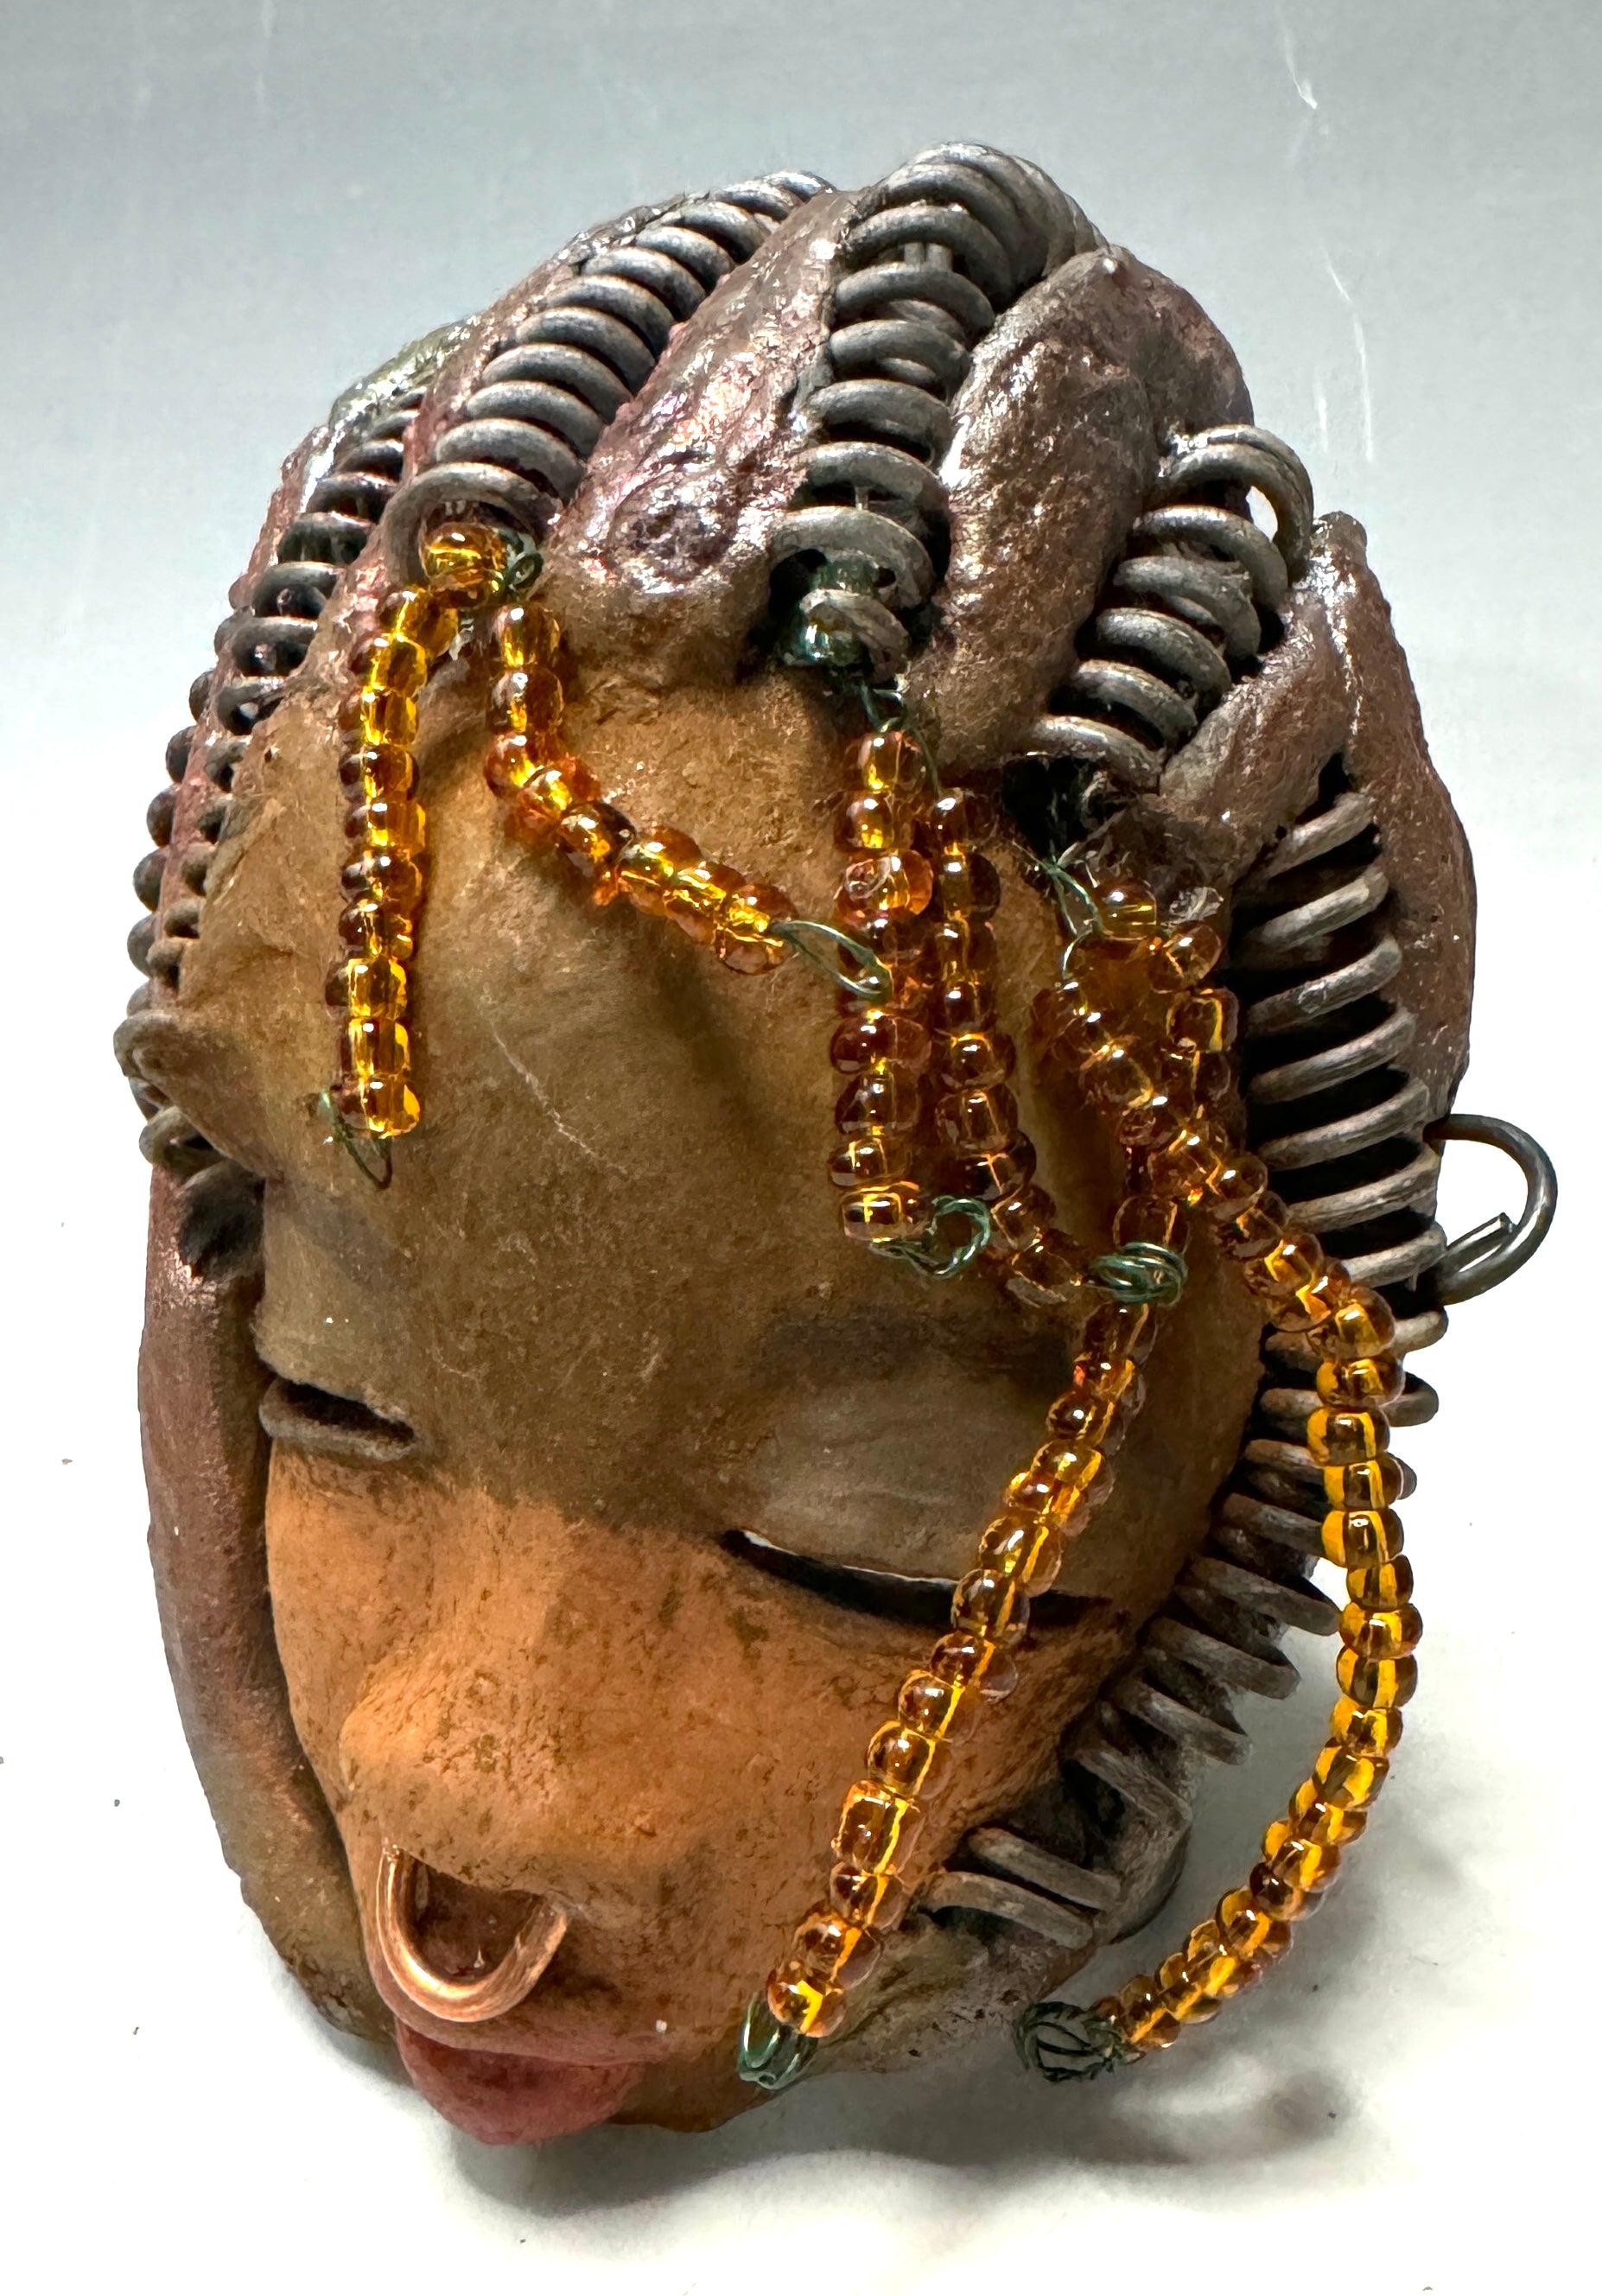 Kenya weighs 5 oz and is 4" by 3" in diameter. Her hair is coppered braided, her complexion is a light gray-blue, and her lips are black. She is a perfect item to start with from the HerDew mask collection. Shadowbox not included.